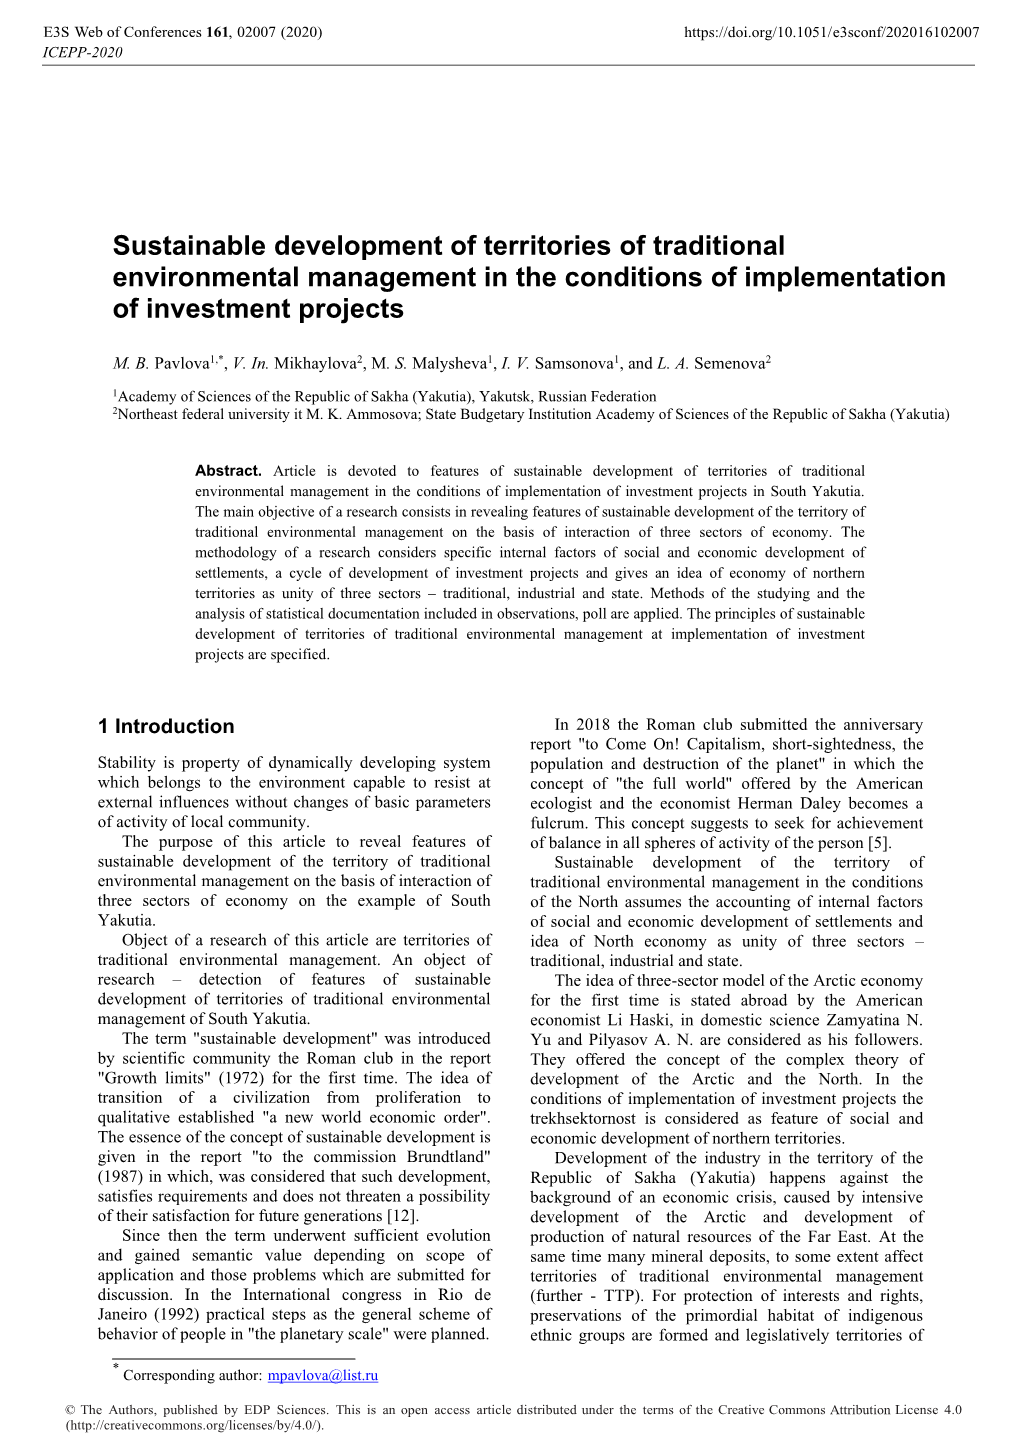 Sustainable Development of Territories of Traditional Environmental Management in the Conditions of Implementation of Investment Projects